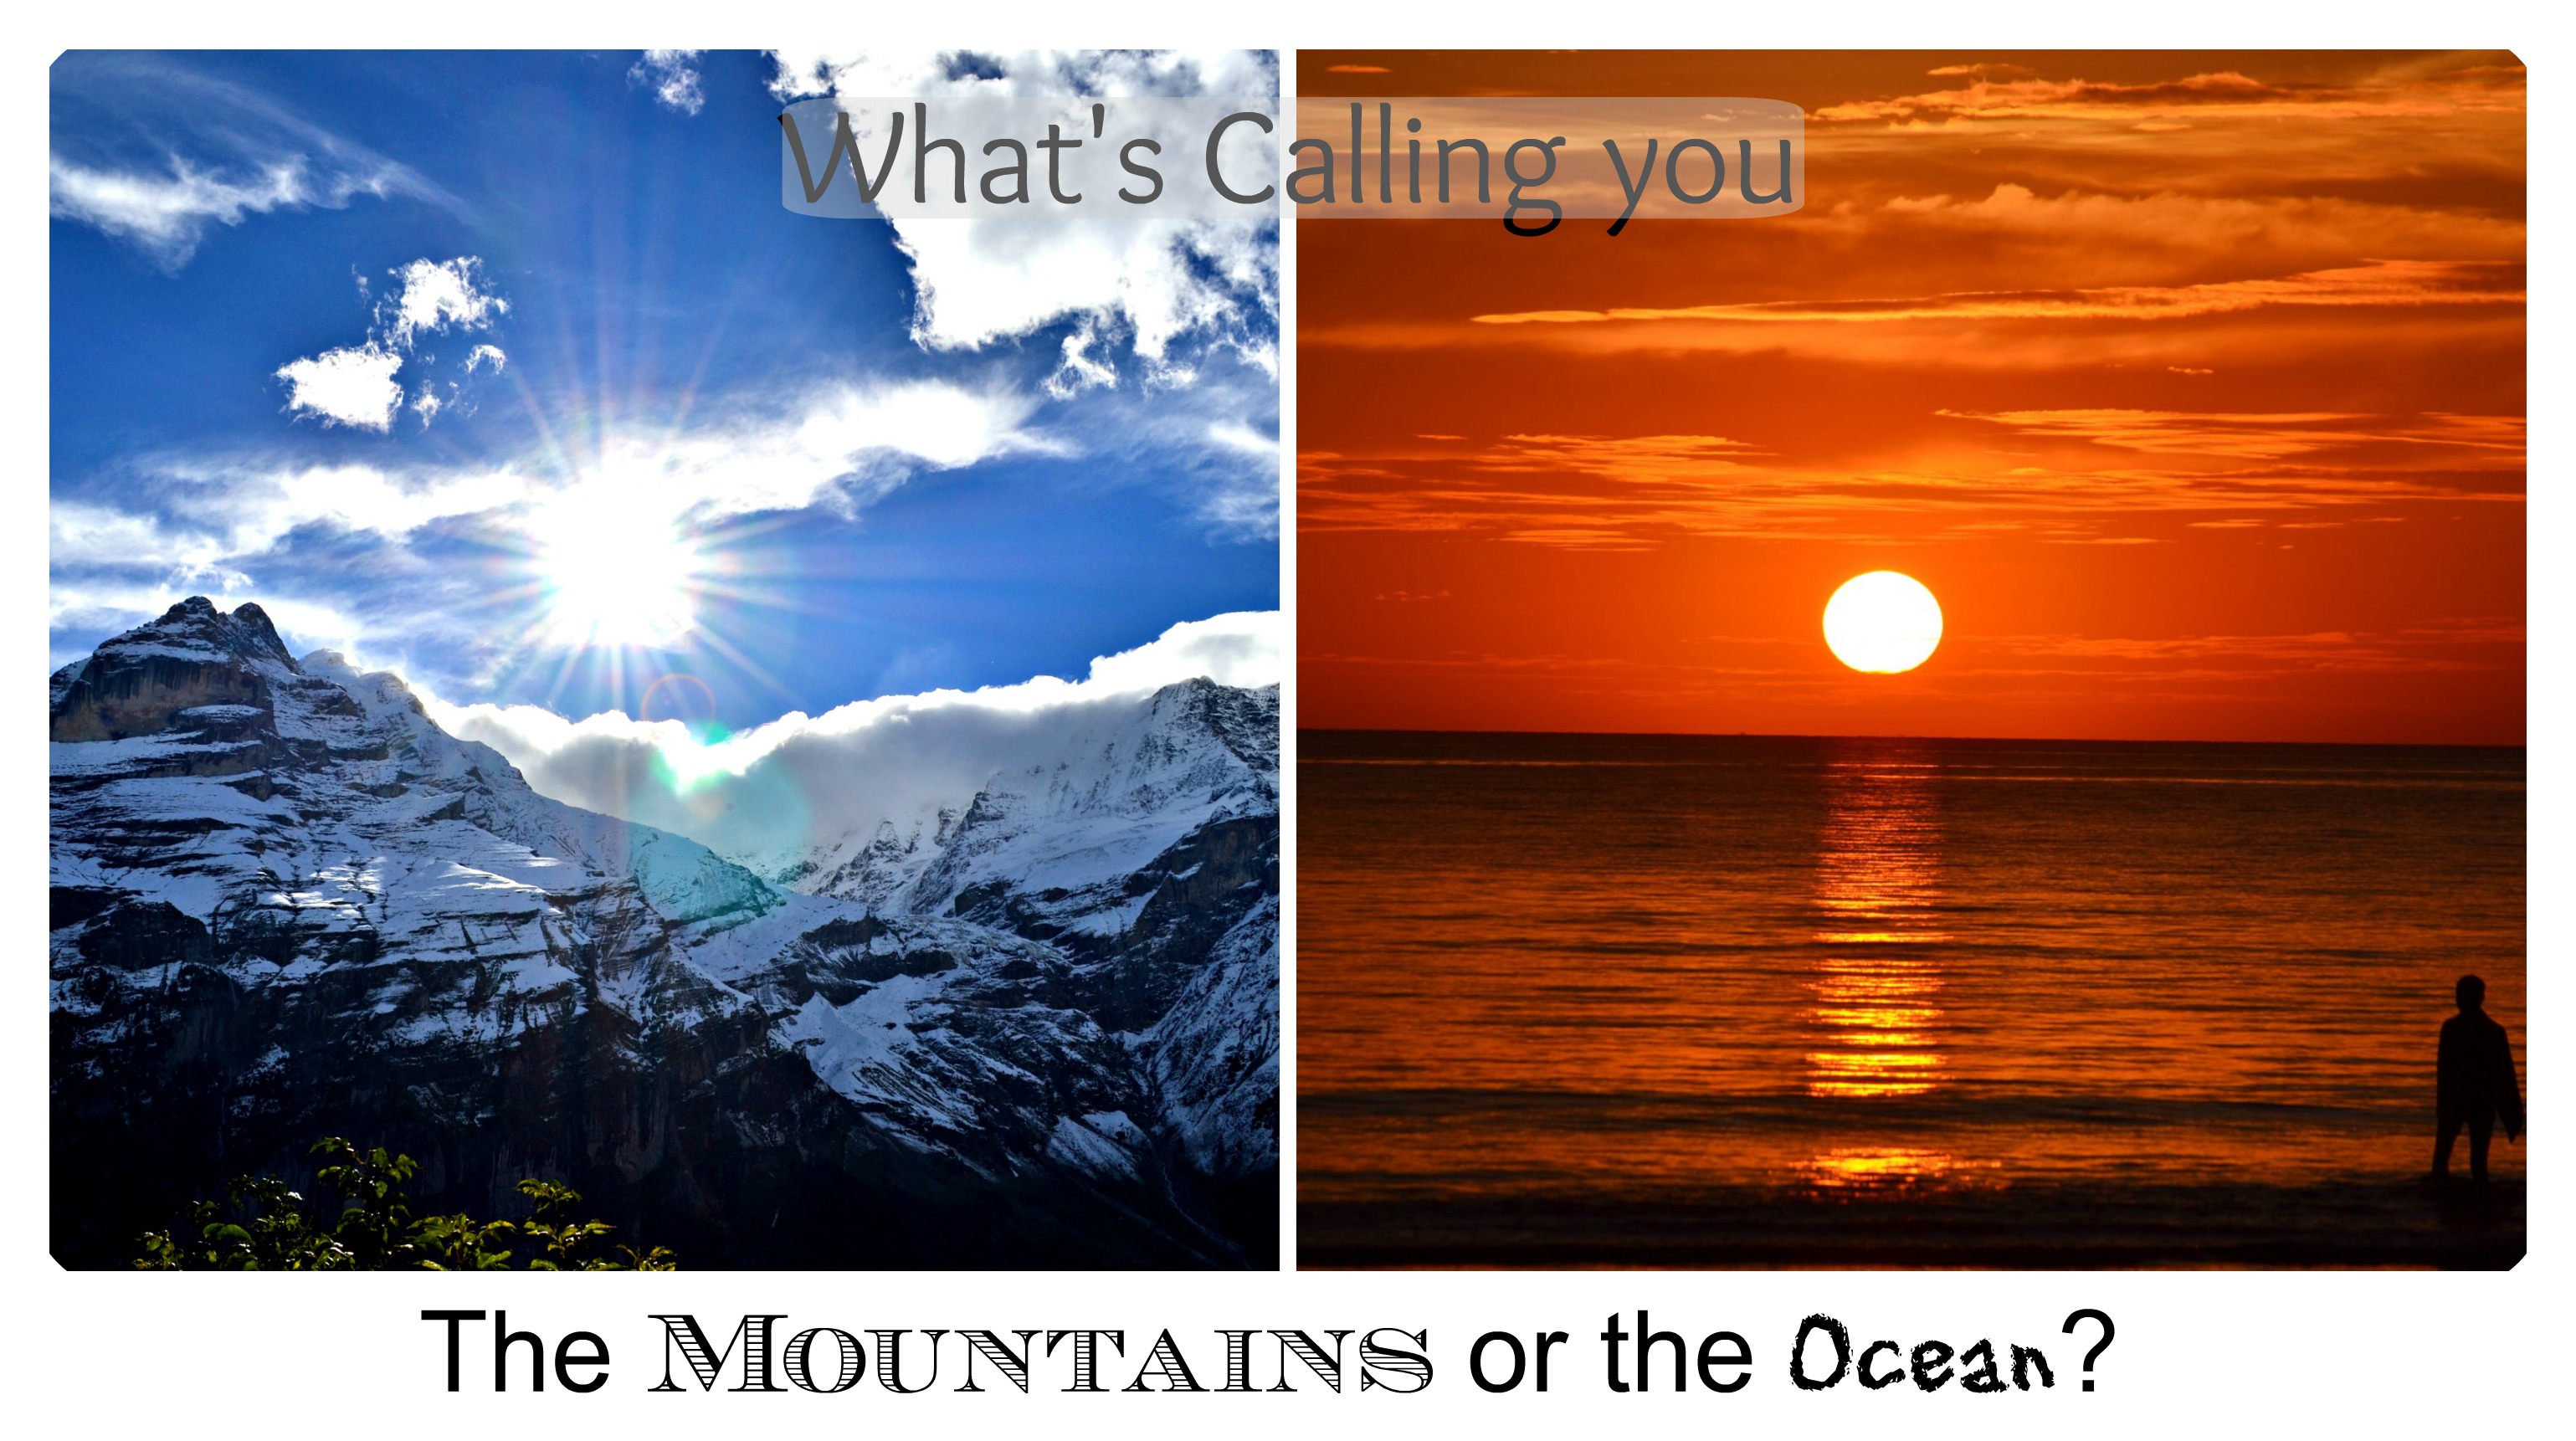 Where would you go? The oceans or the Beach?